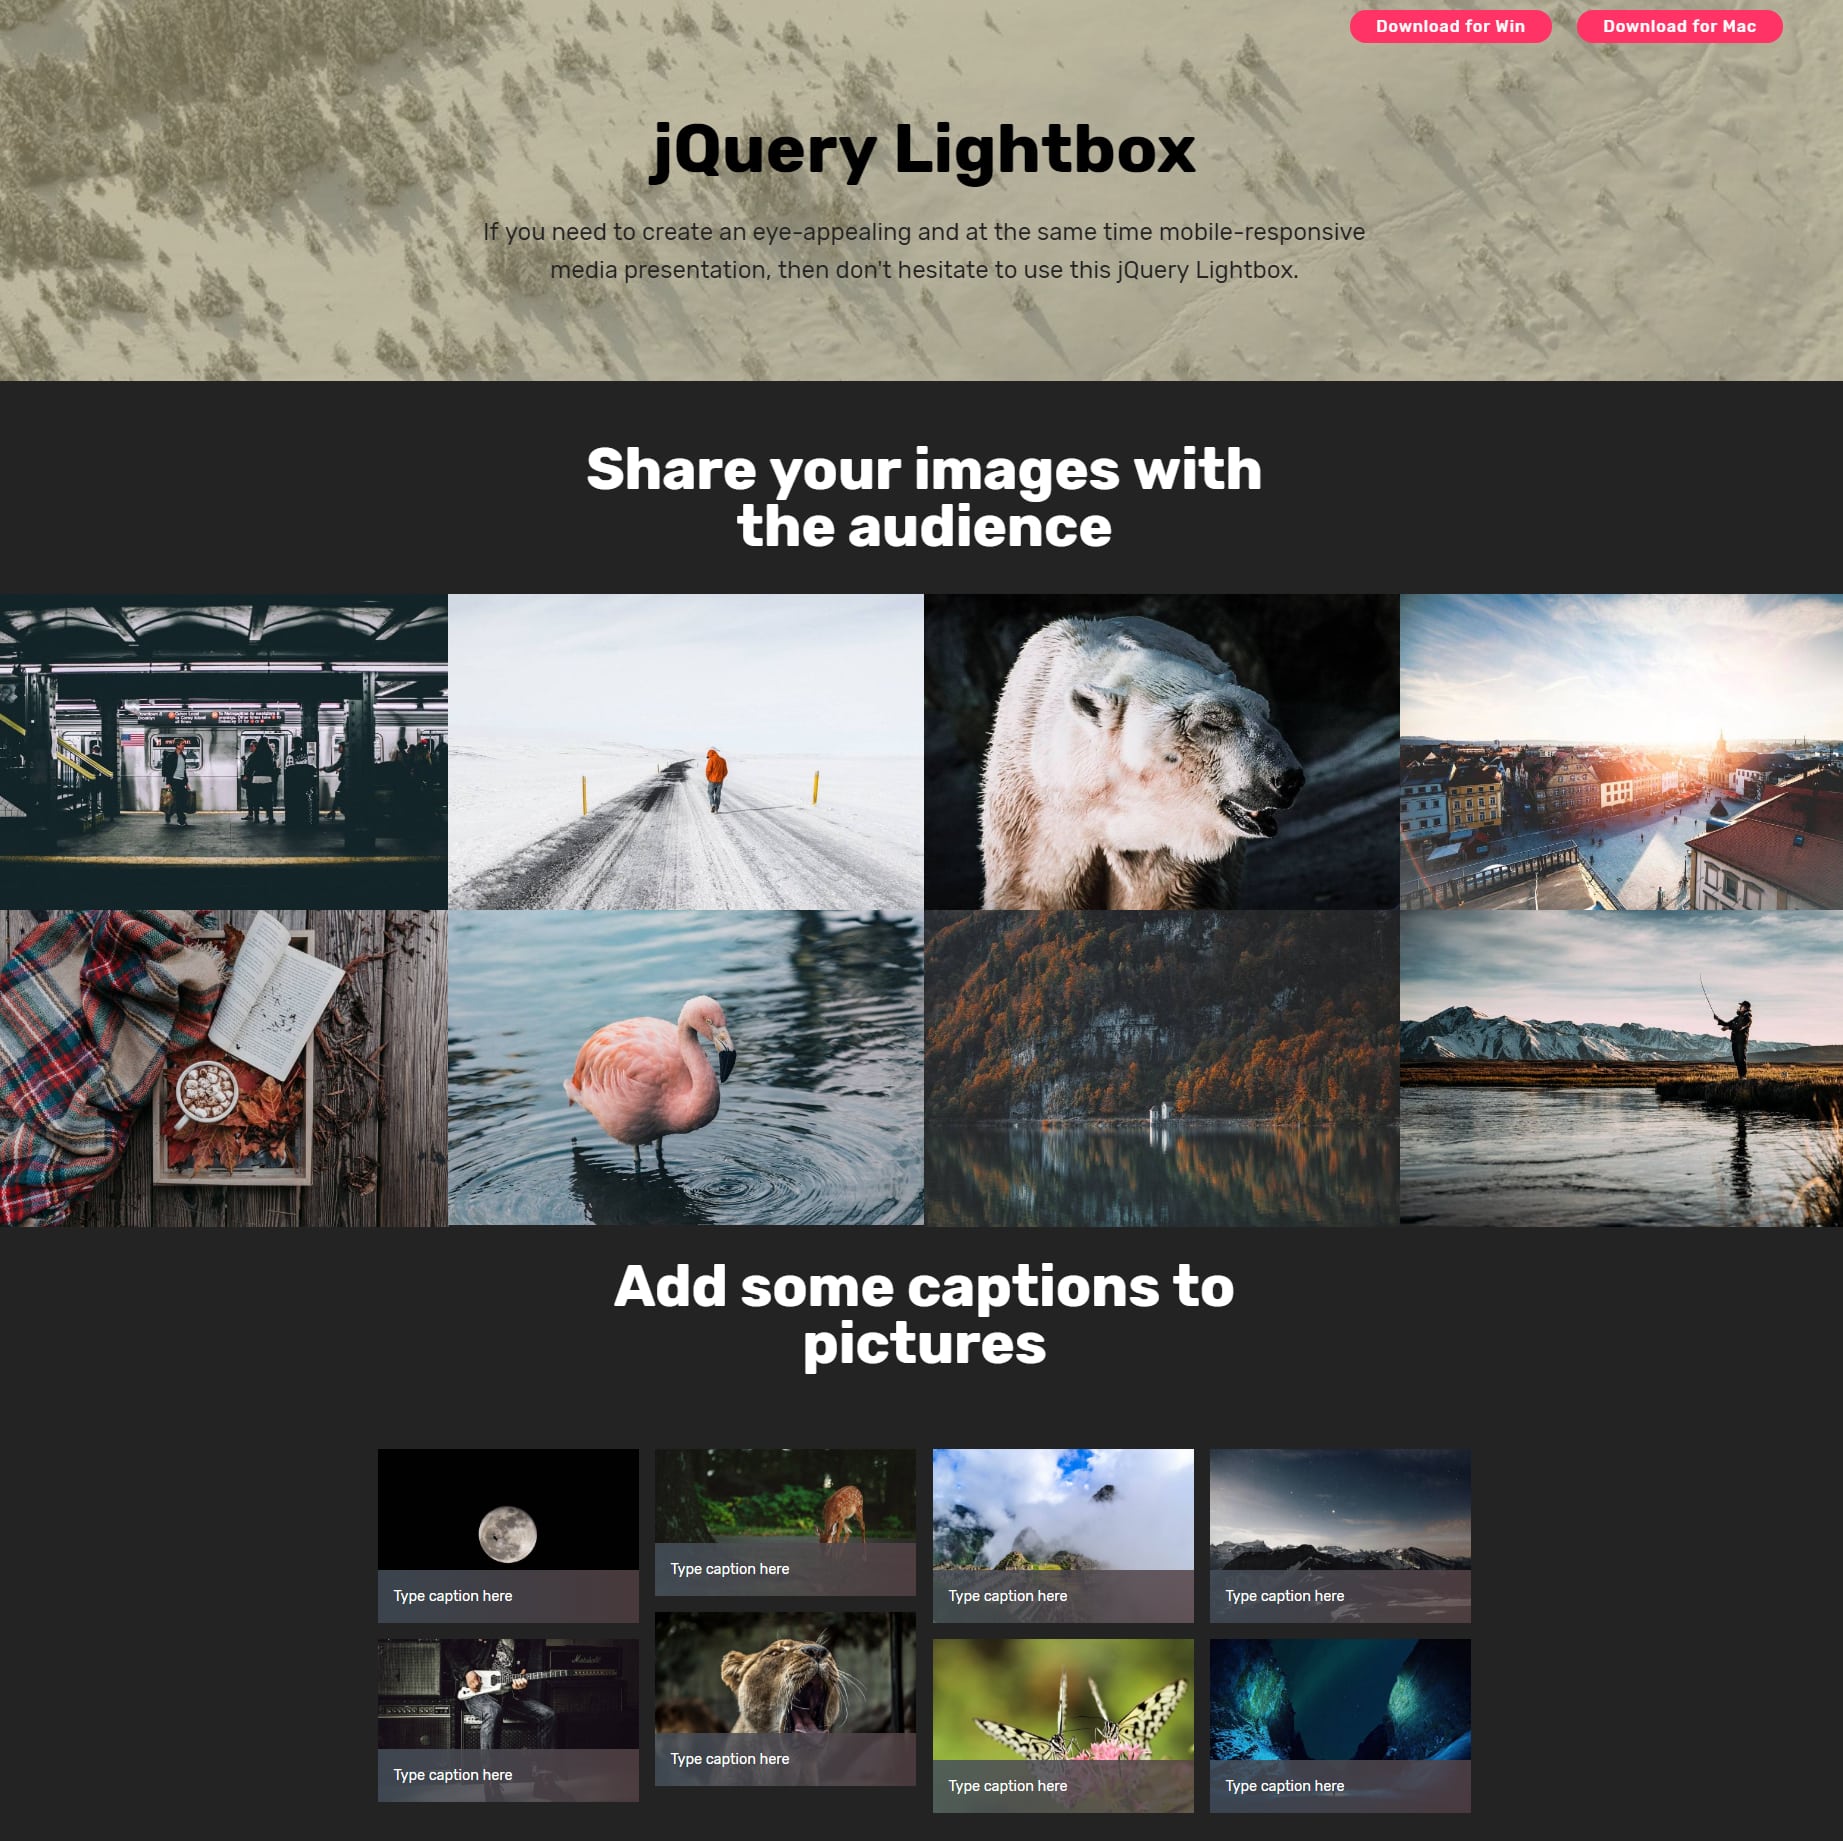 CSS Bootstrap Image Gallery